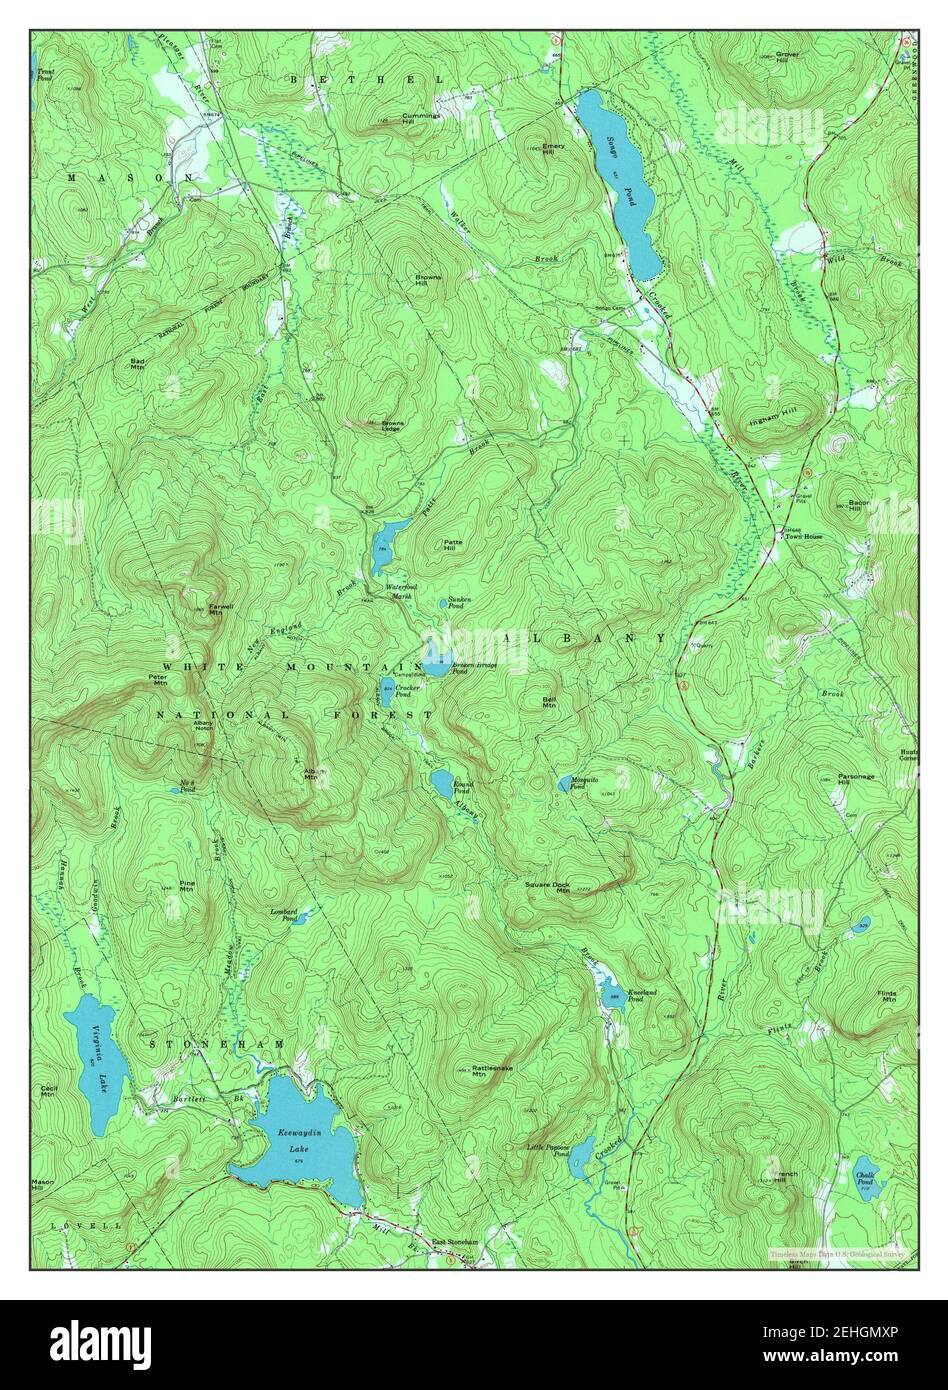 East Stoneham, Maine, map 1970, 1:24000, United States of America by Timeless Maps, data U.S. Geological Survey Stock Photo